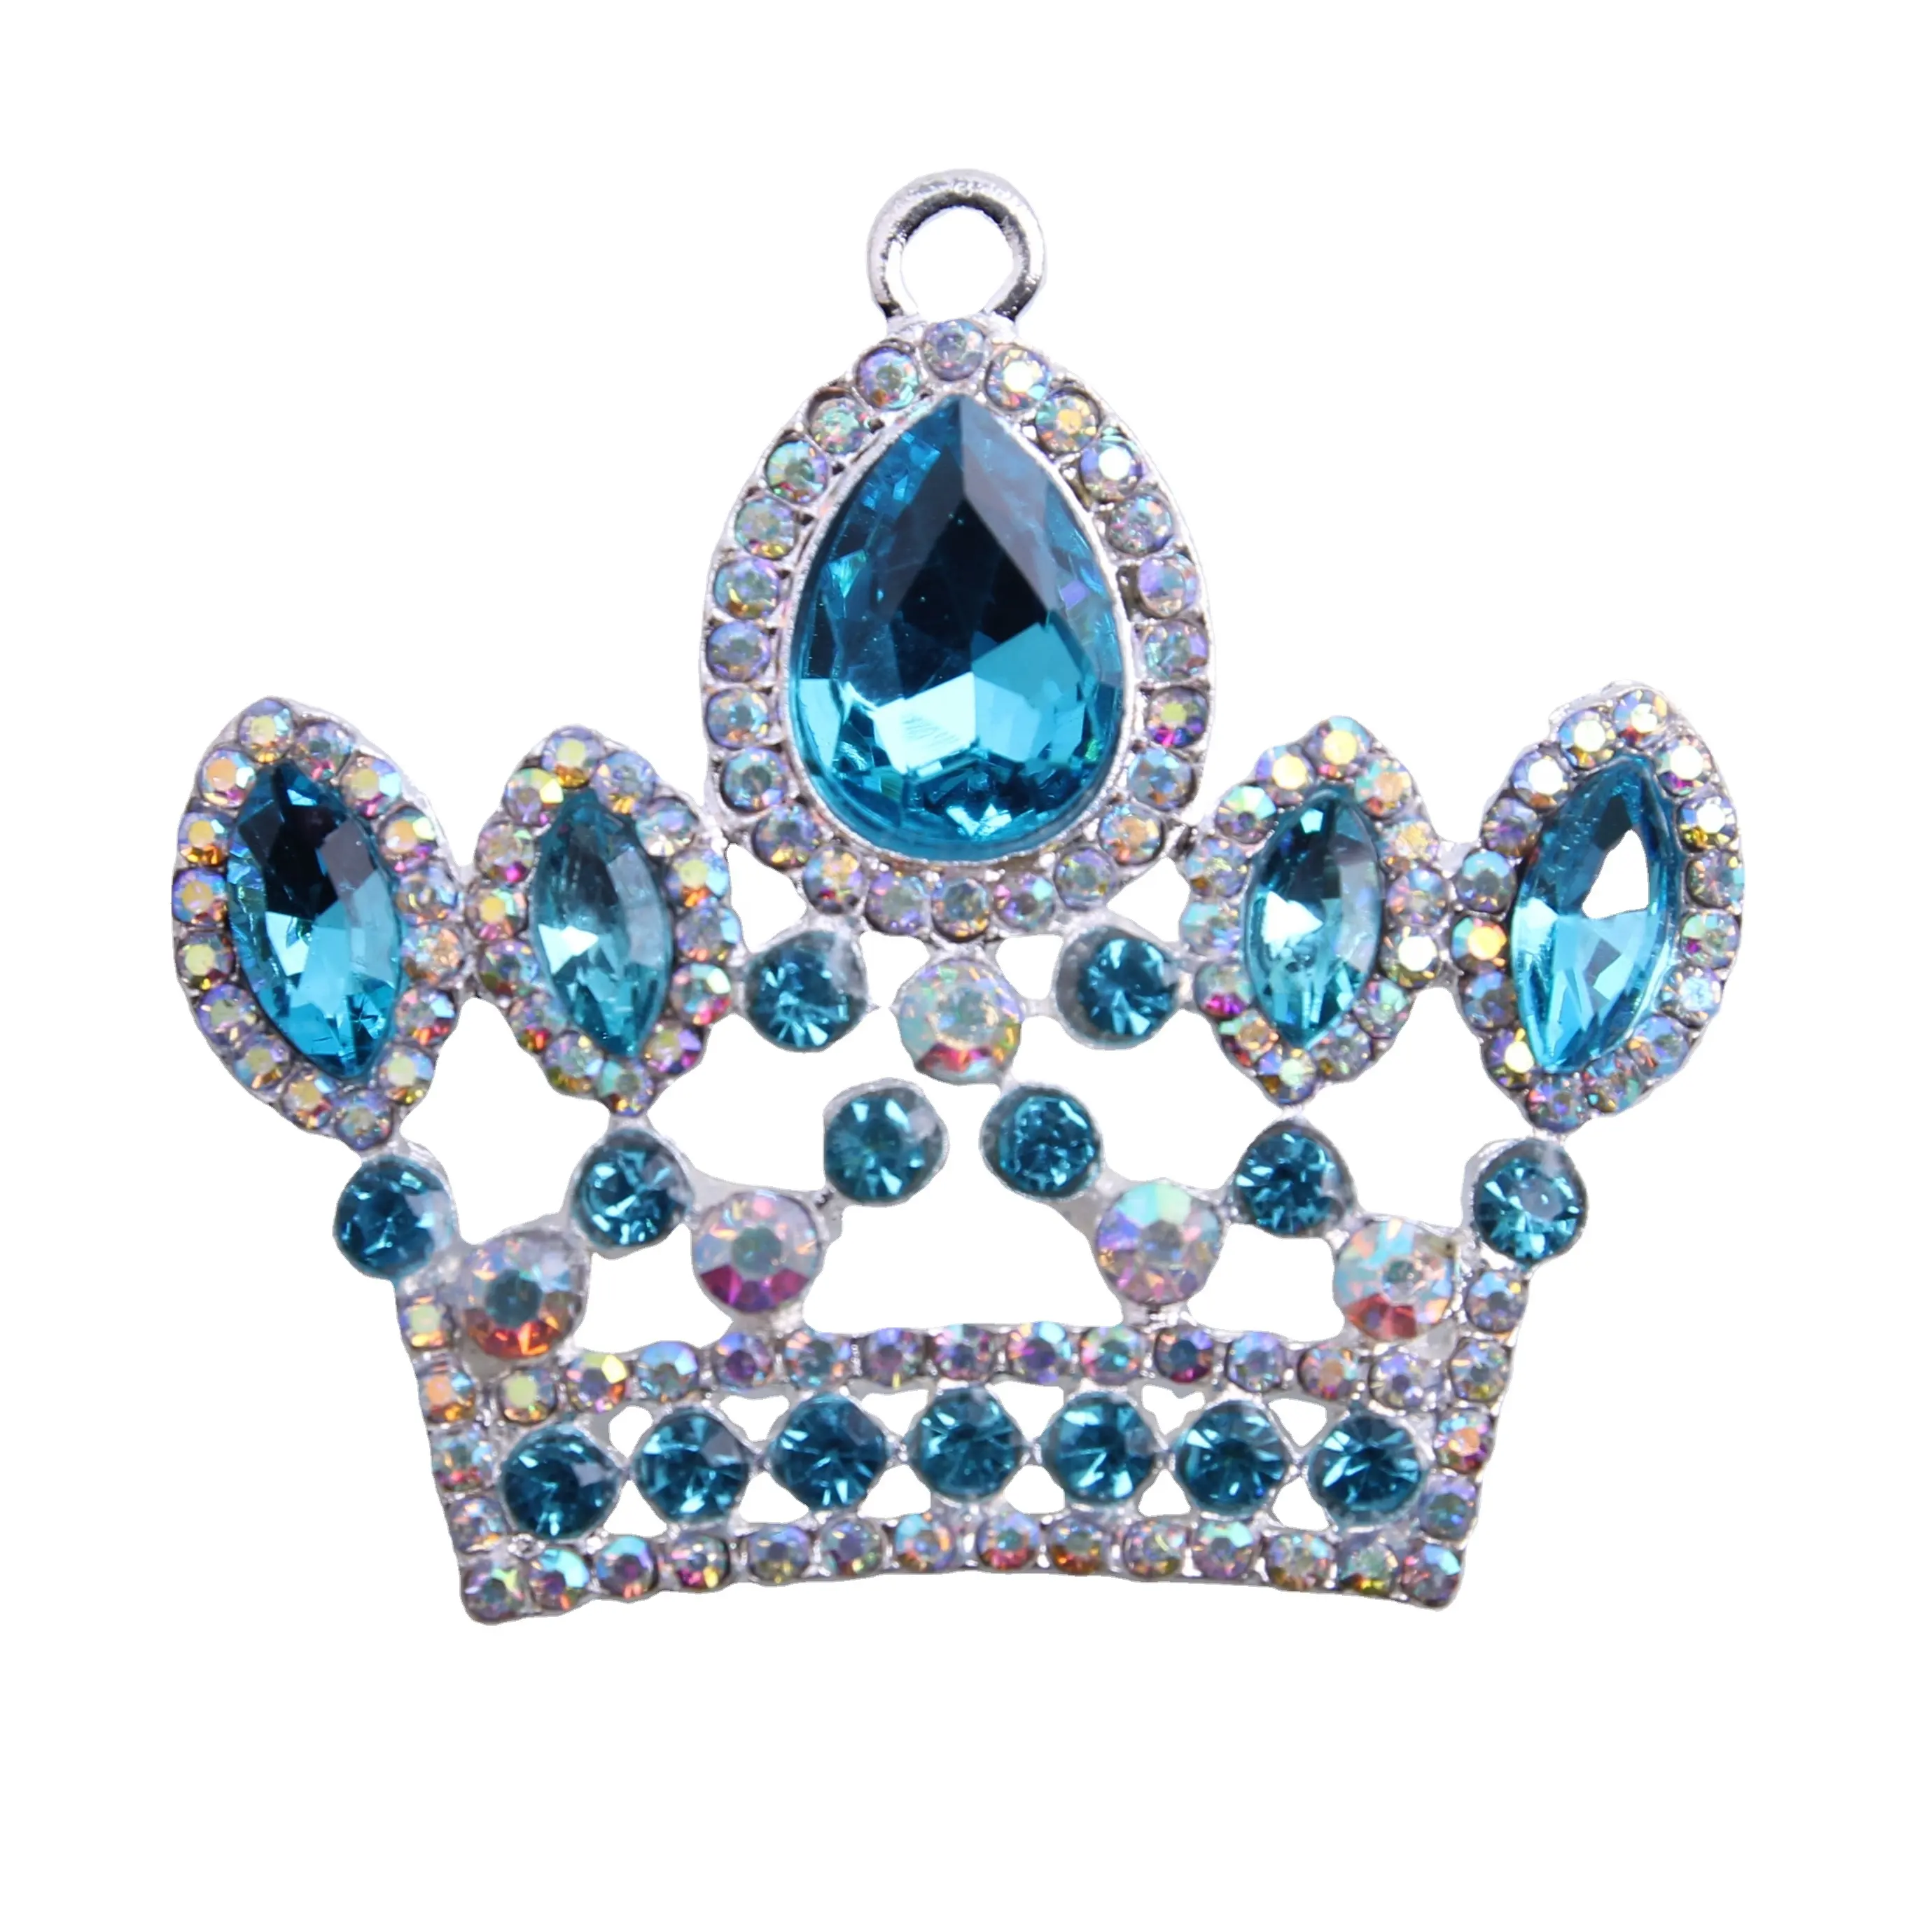 Fashion Jewelry 47x50mm Alloy Crown Crytal Rhinestone Pendants Charms for Chunky Necklace Keychain Making